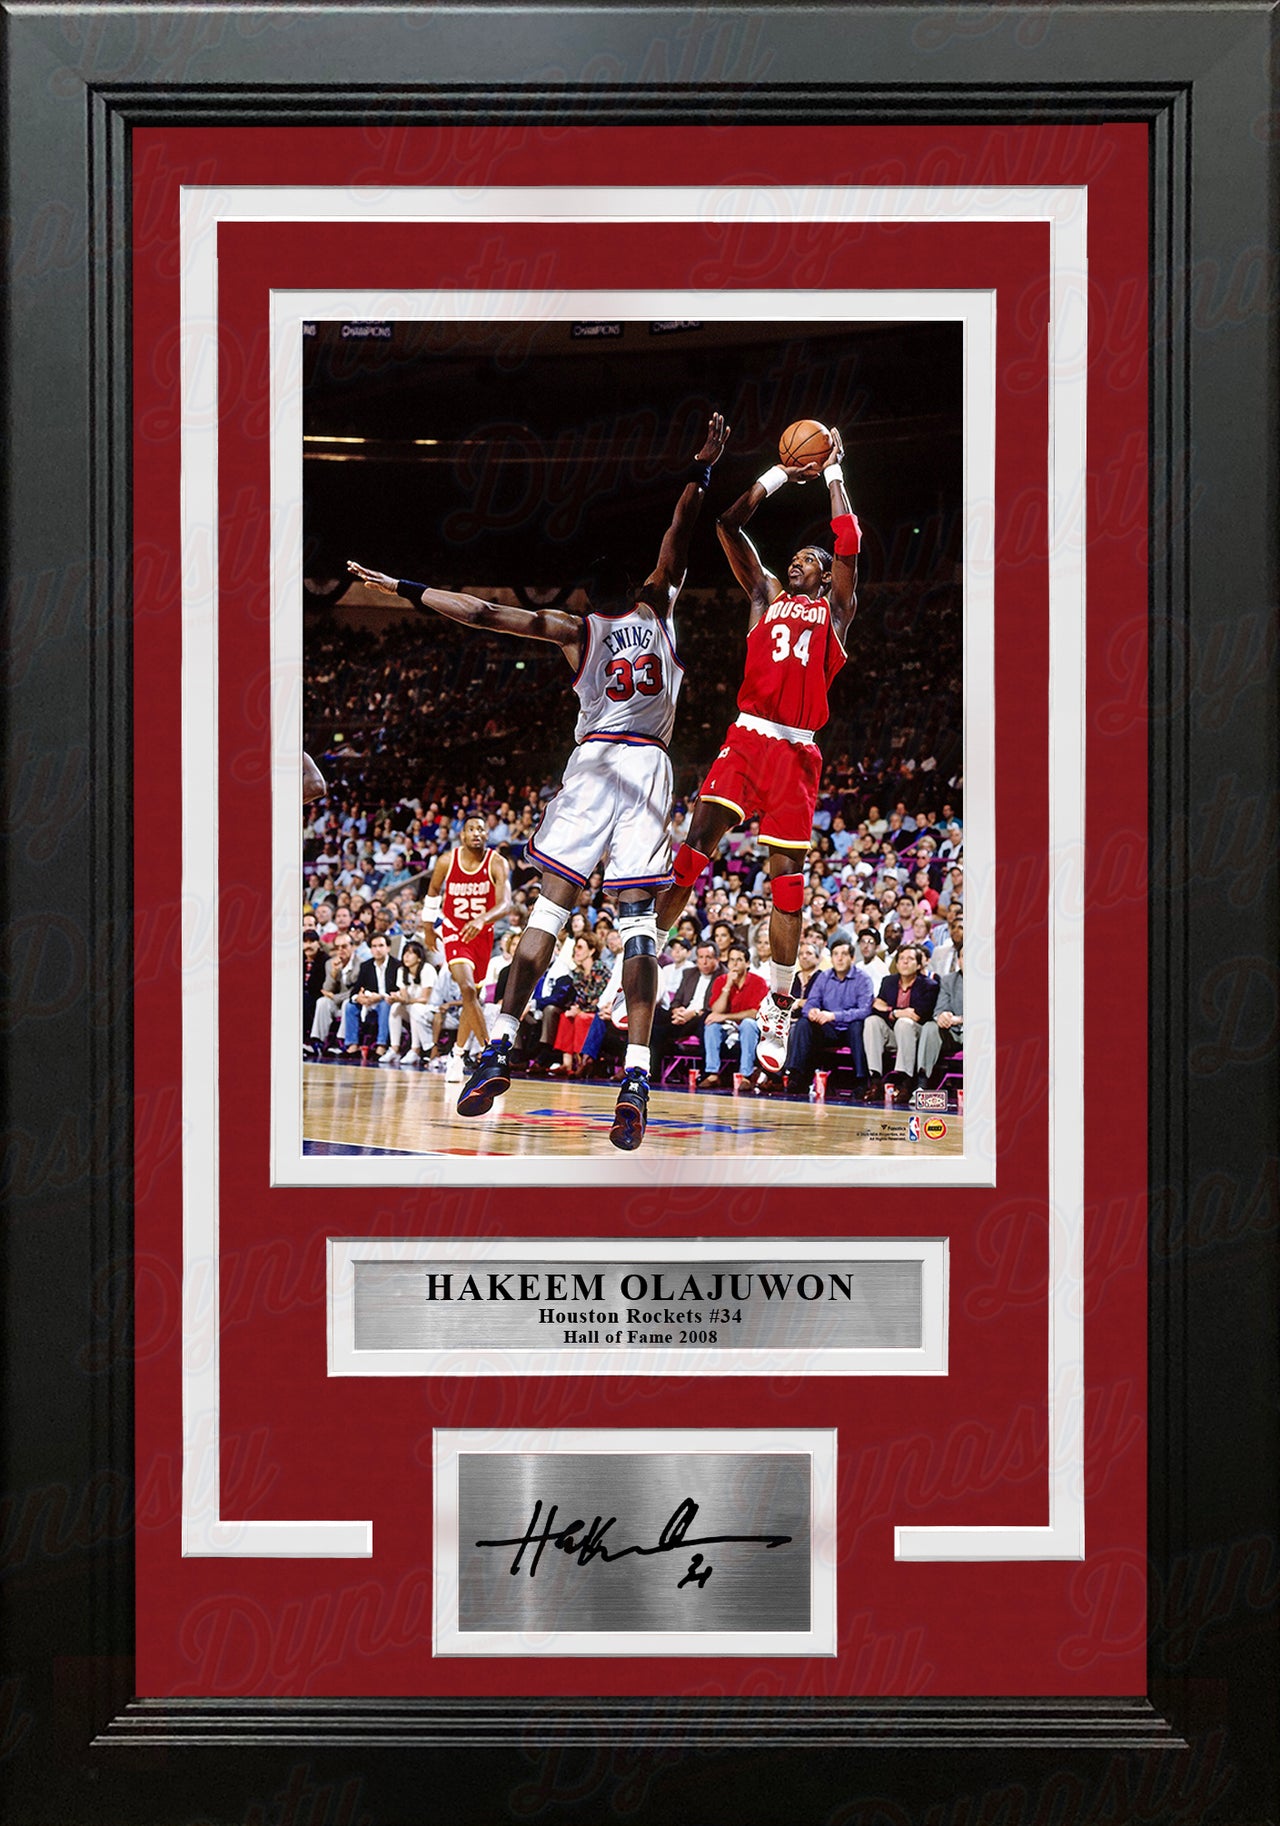 Hakeem Olajuwon in Action Houston Rockets 8" x 10" Framed Basketball Photo with Engraved Autograph - Dynasty Sports & Framing 